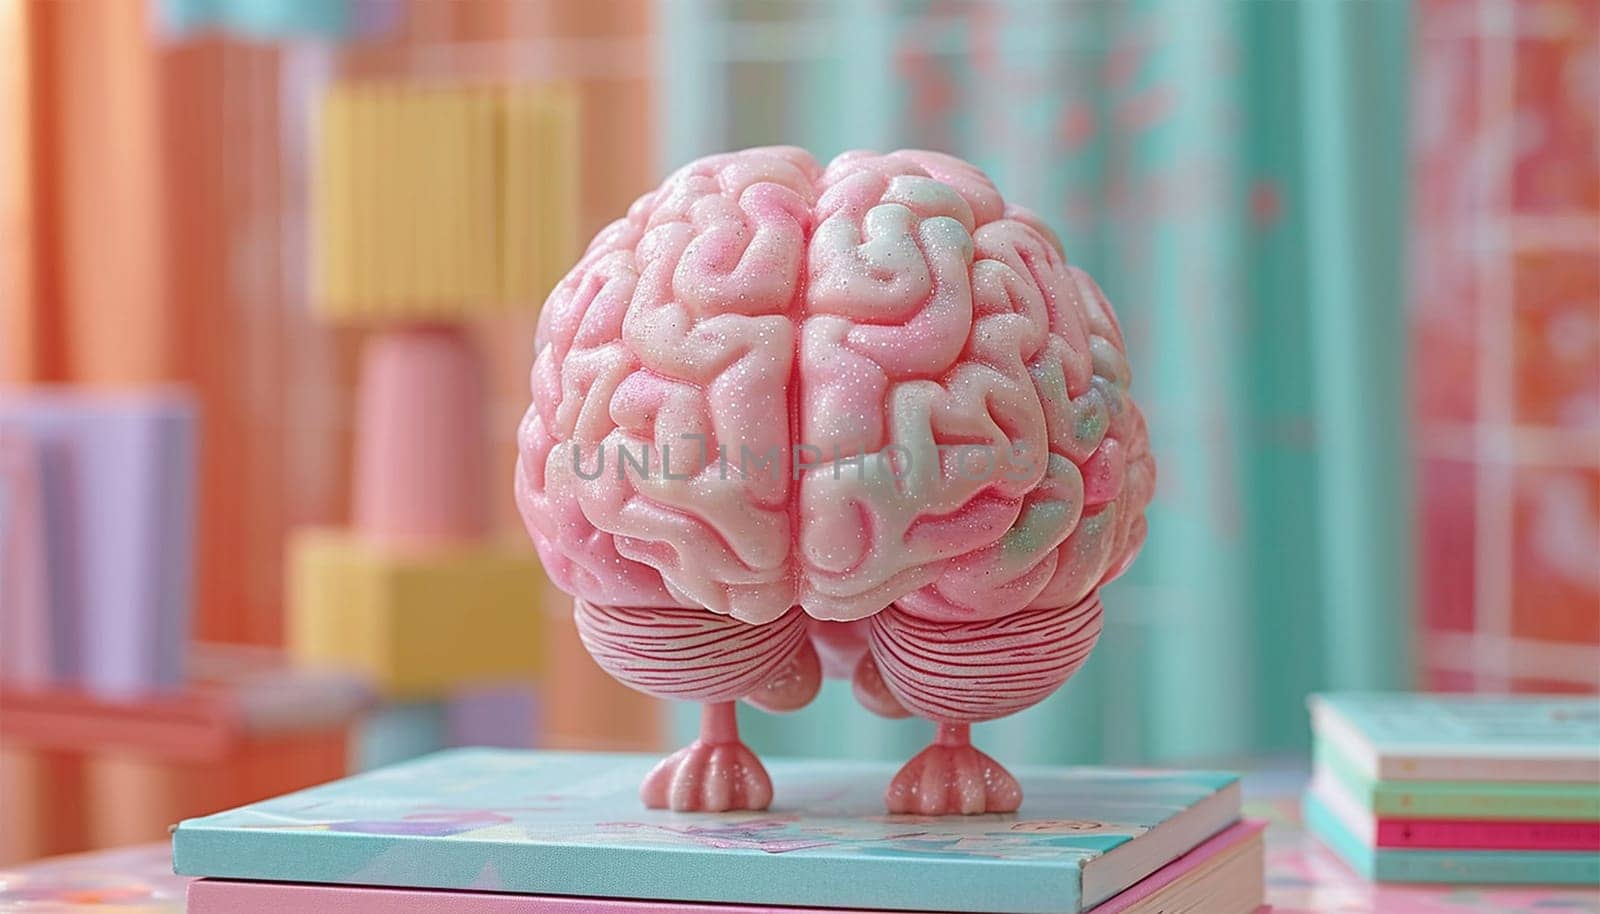 Cute animation smart cartoon brain standing on pile of books. Reading a book. pastel colors 3D. Education,brainstorming and learning concept pink